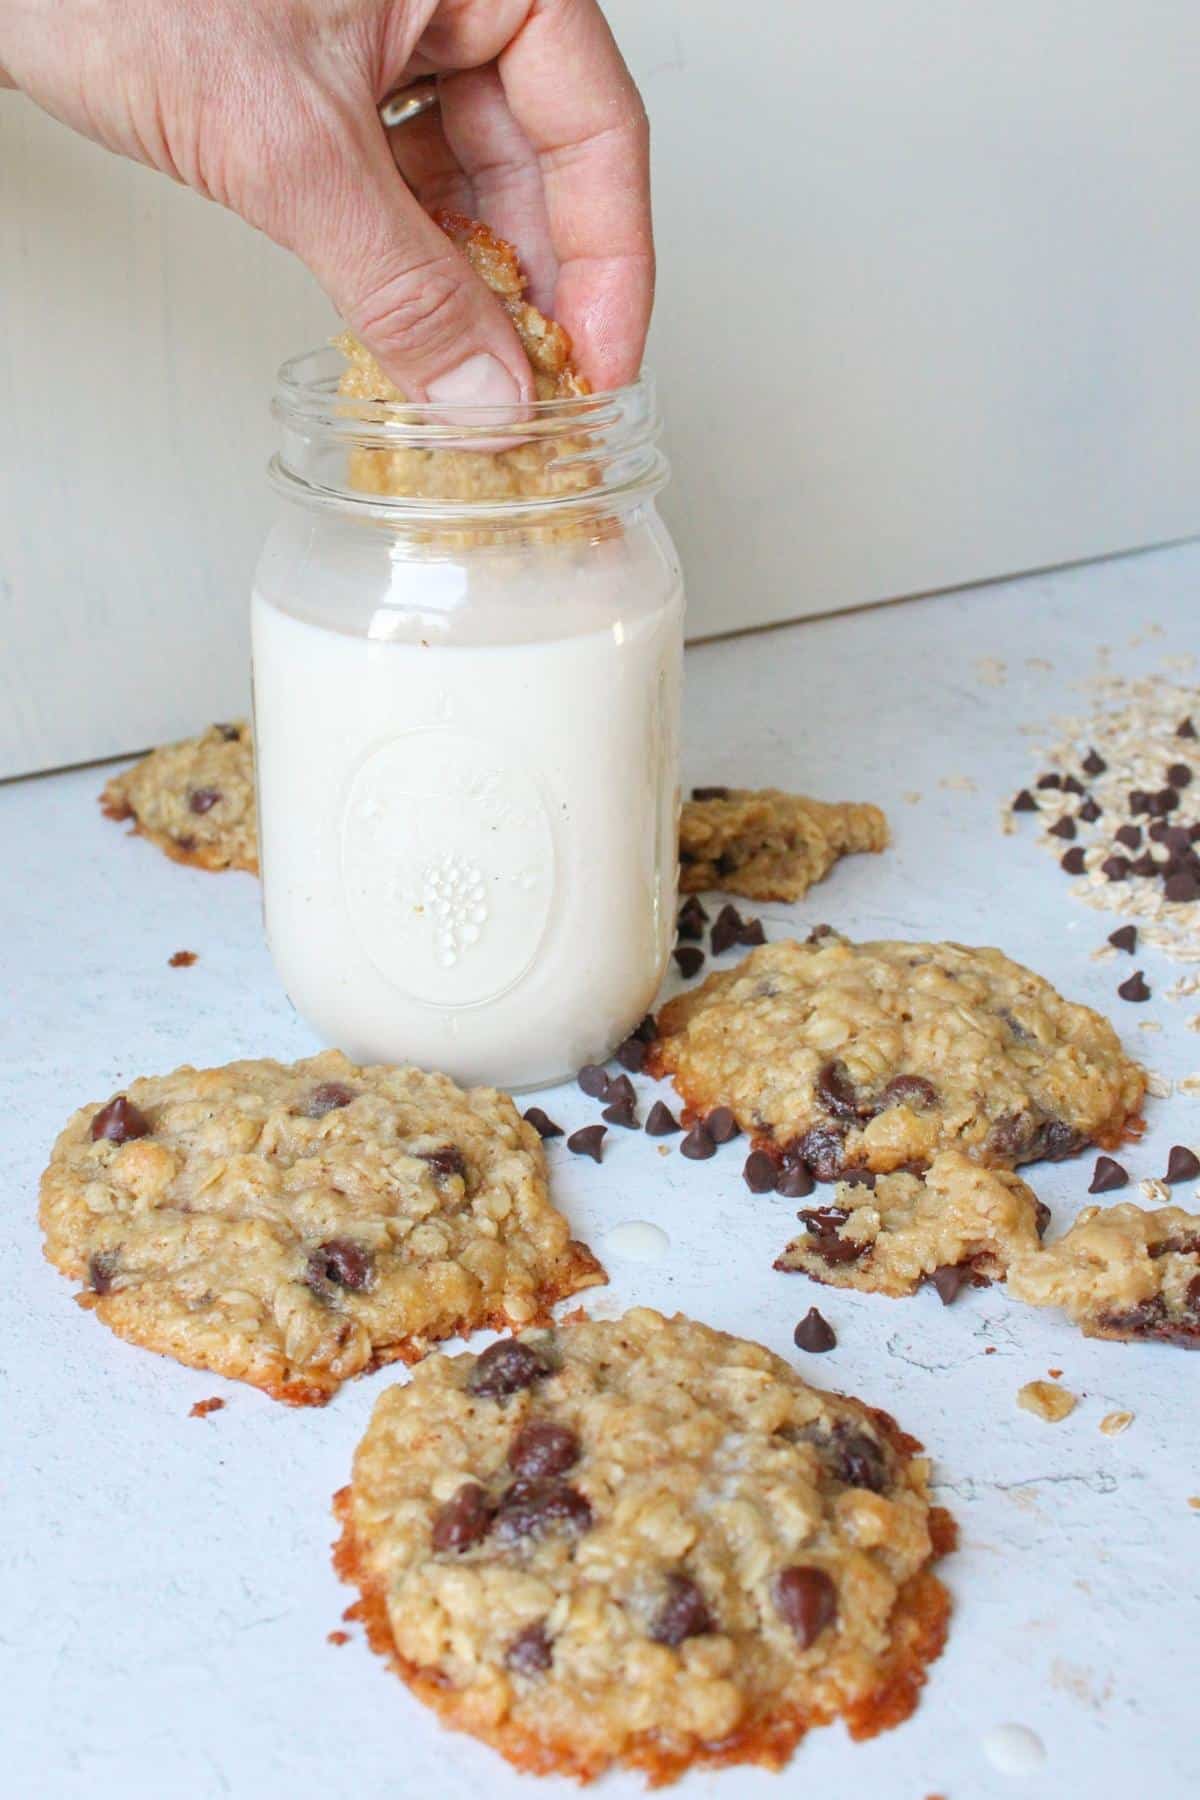 Hand dunking a piece of vegan oatmeal chocolate chip cookie into a glass of soy milk.